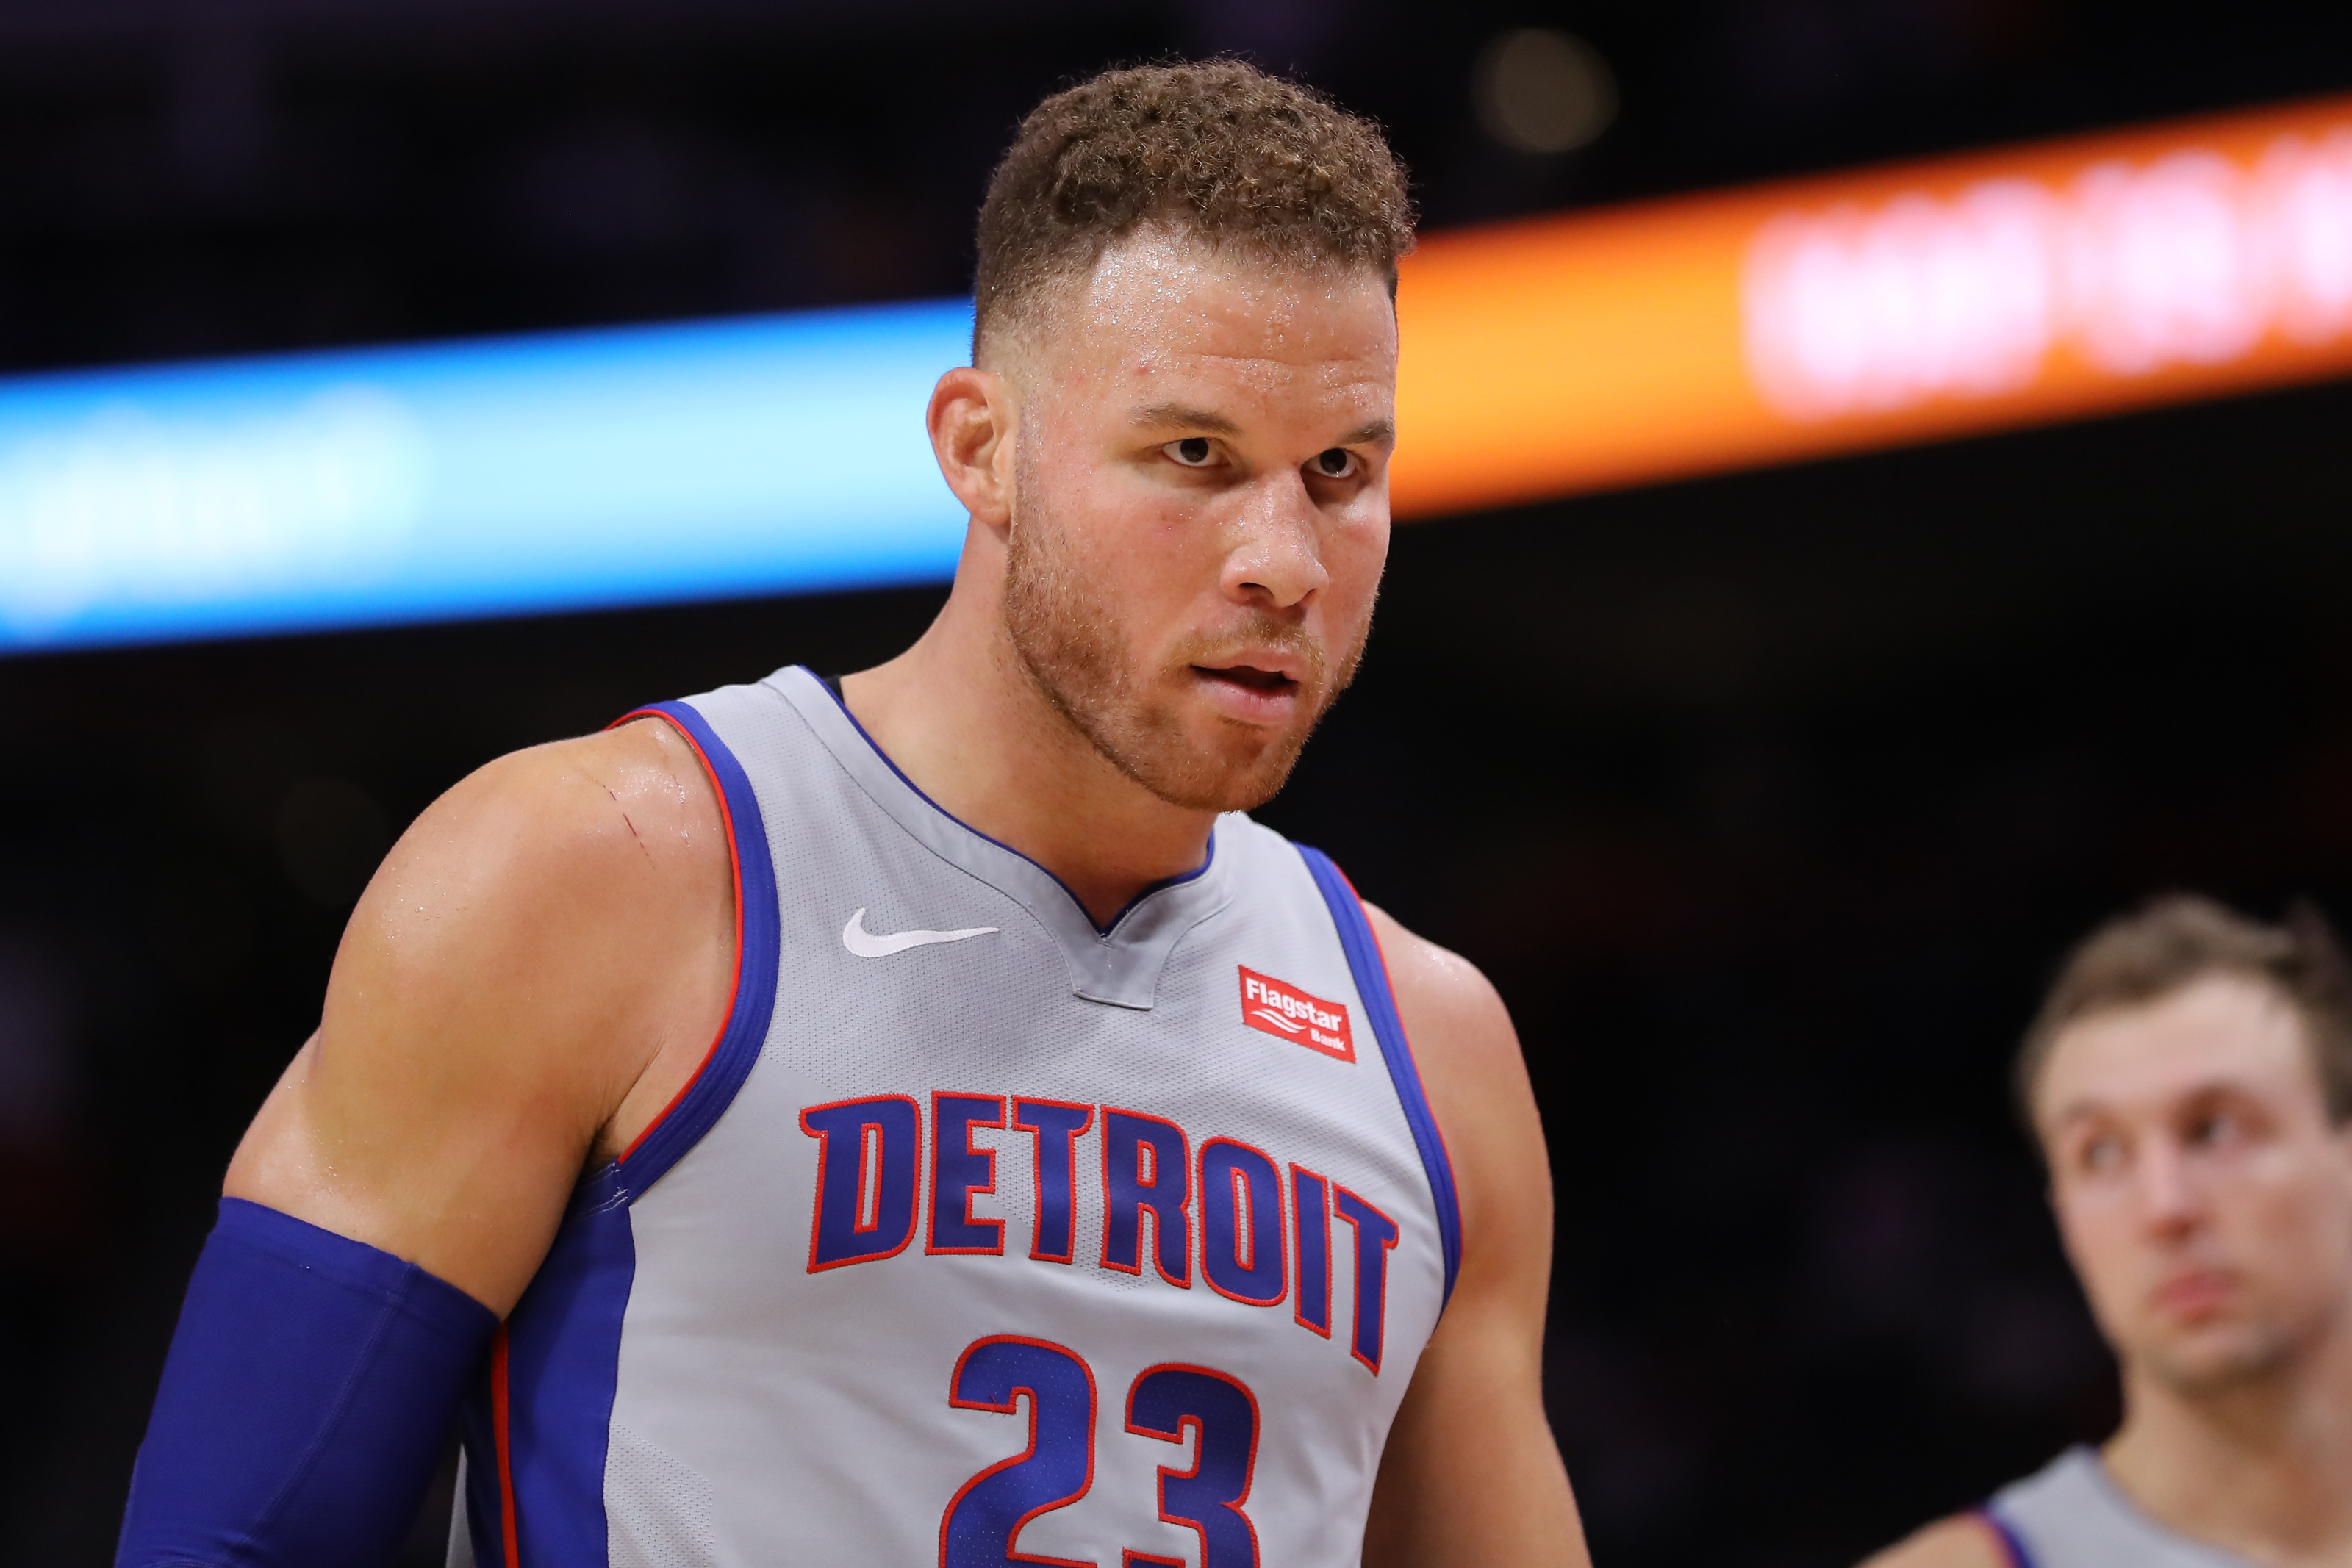 Reports: LA Clippers agree to trade Blake Griffin to Detroit Pistons